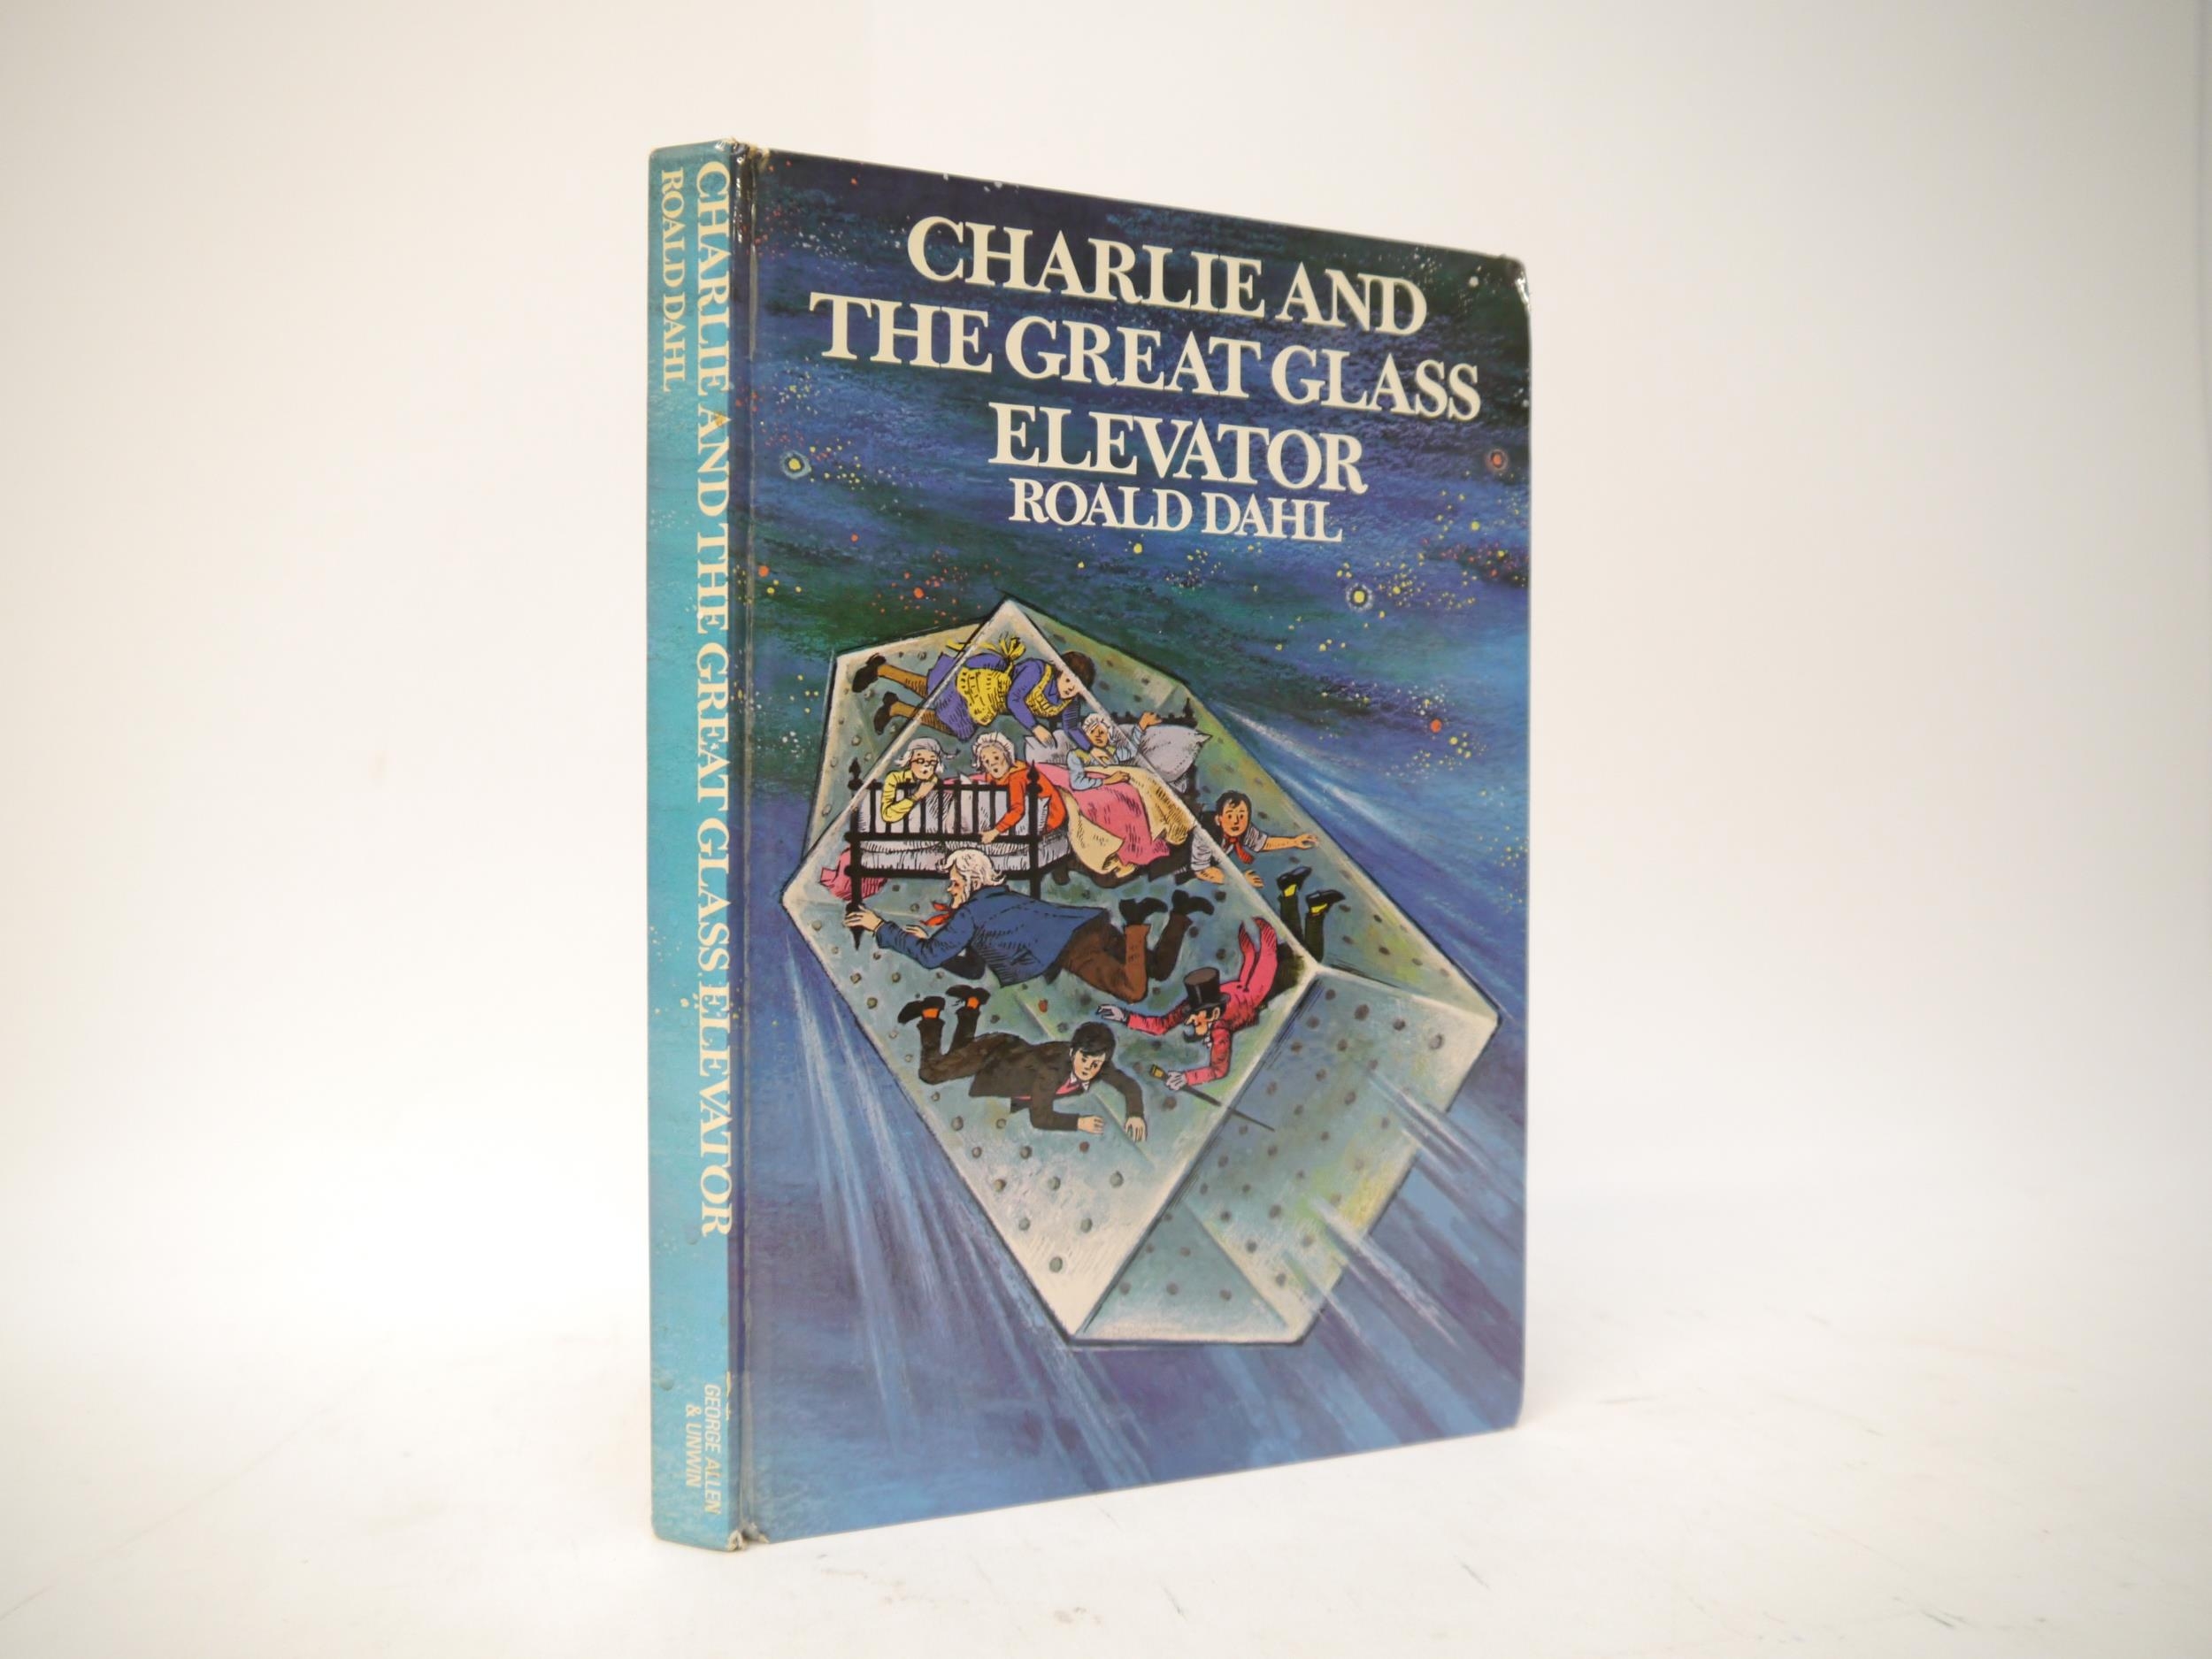 Roald Dahl: 'Charlie and the Great Glass Elevator', London, George Allen & Unwin, 1973, 1st edition, - Image 7 of 7